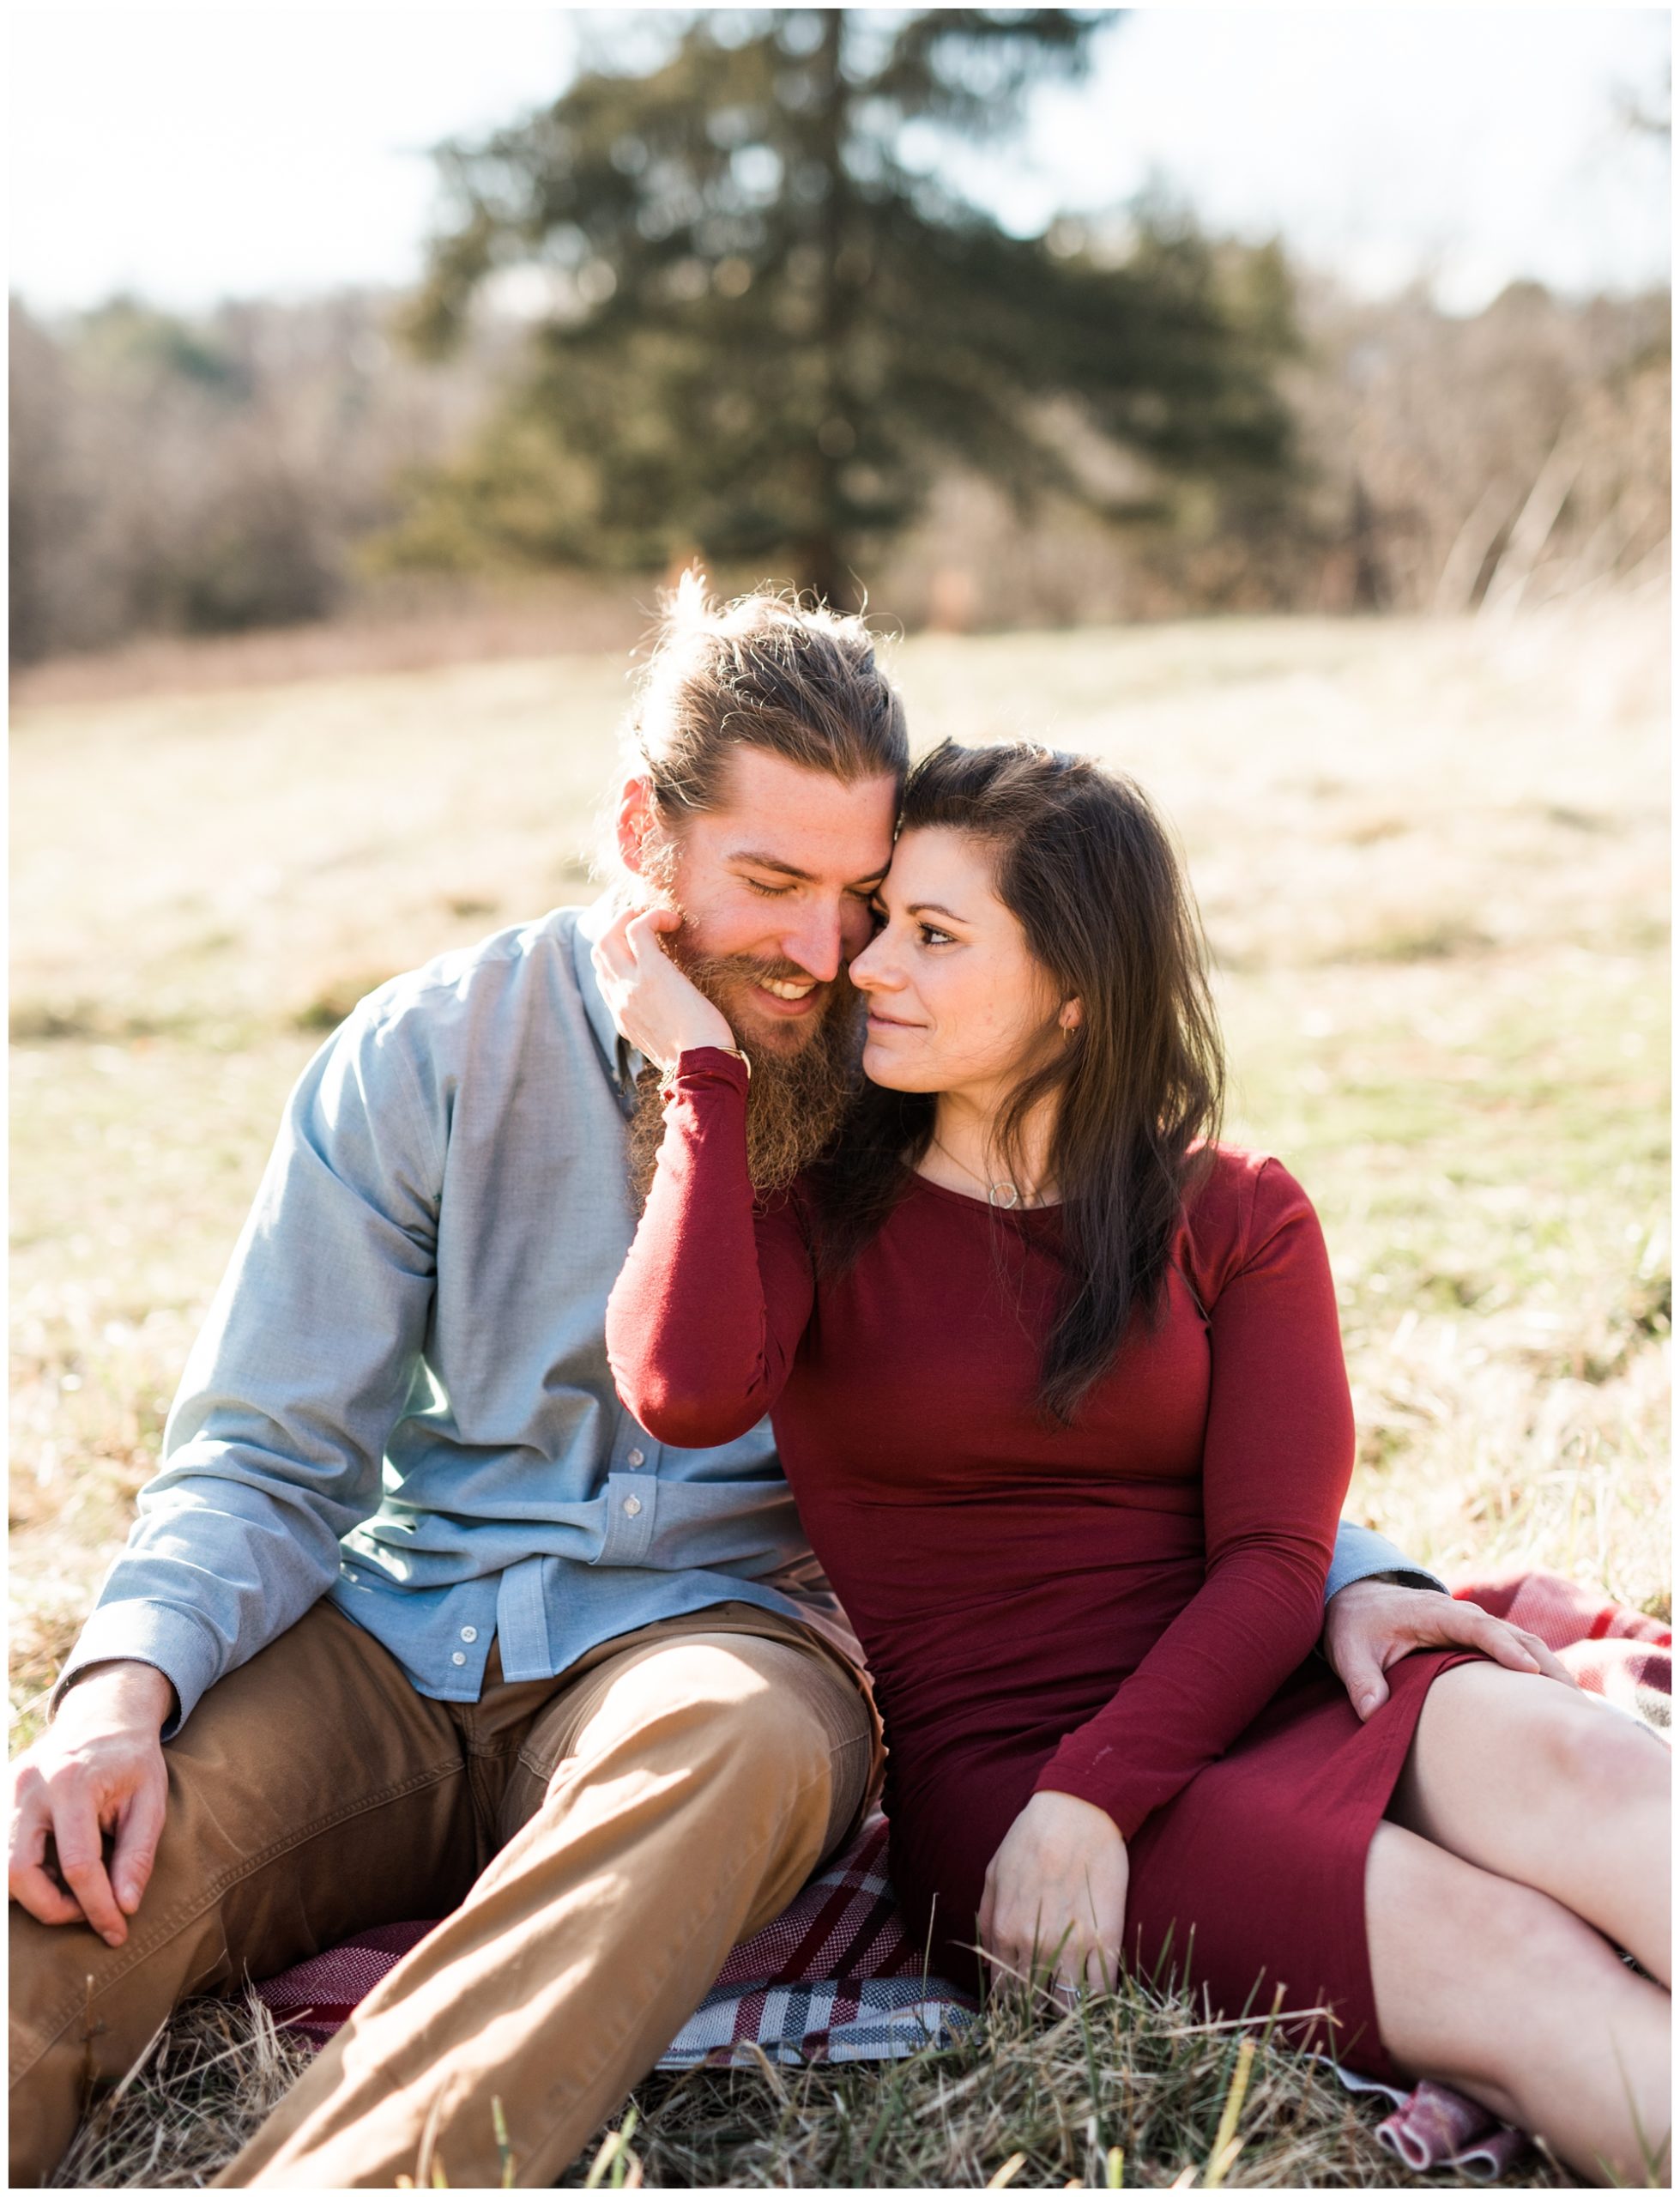 Monticello Trail winter engagement session in Charlottesville Virginia 